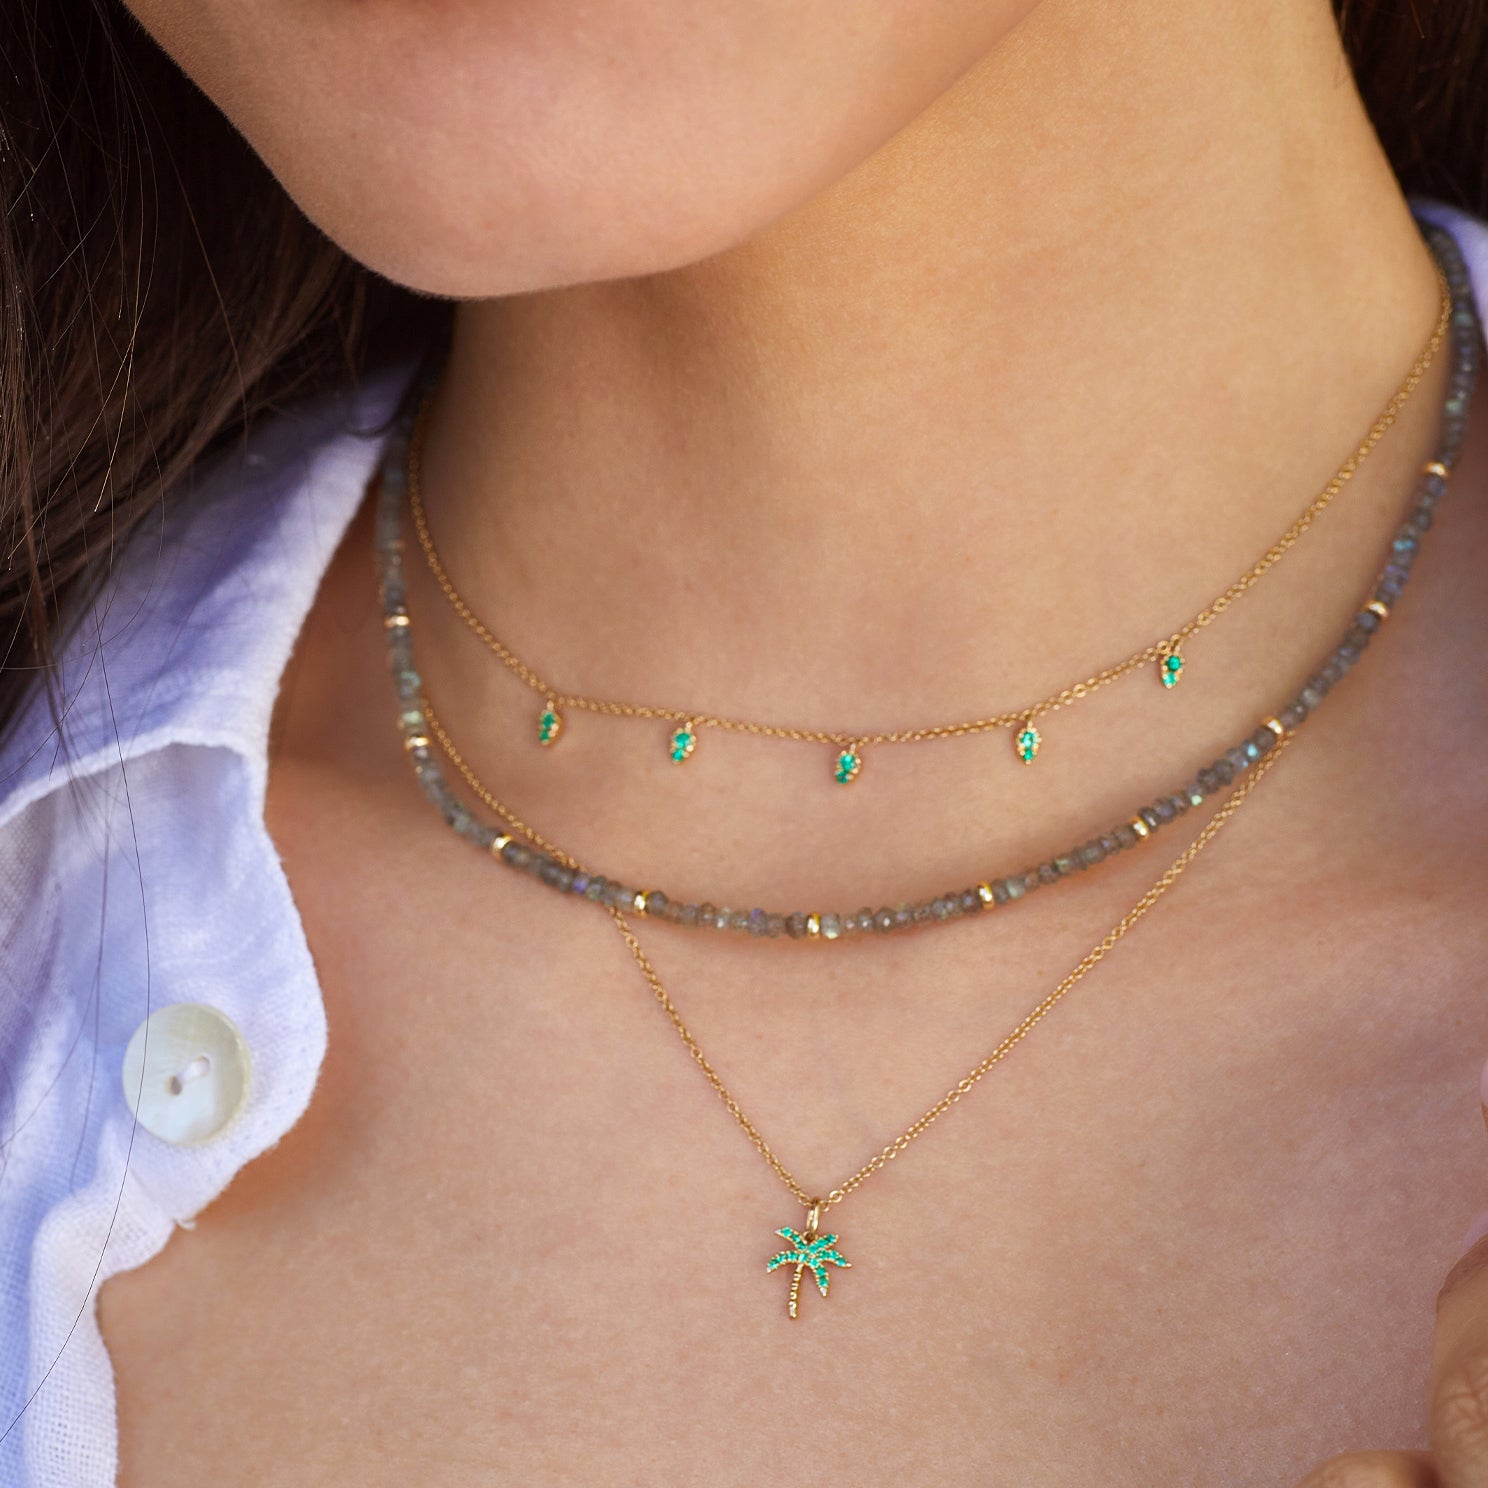 Emerald Wild Palm Necklace in 14k yellow gold styled on neck of model with emerald 5 teardrop necklace and beaded necklace